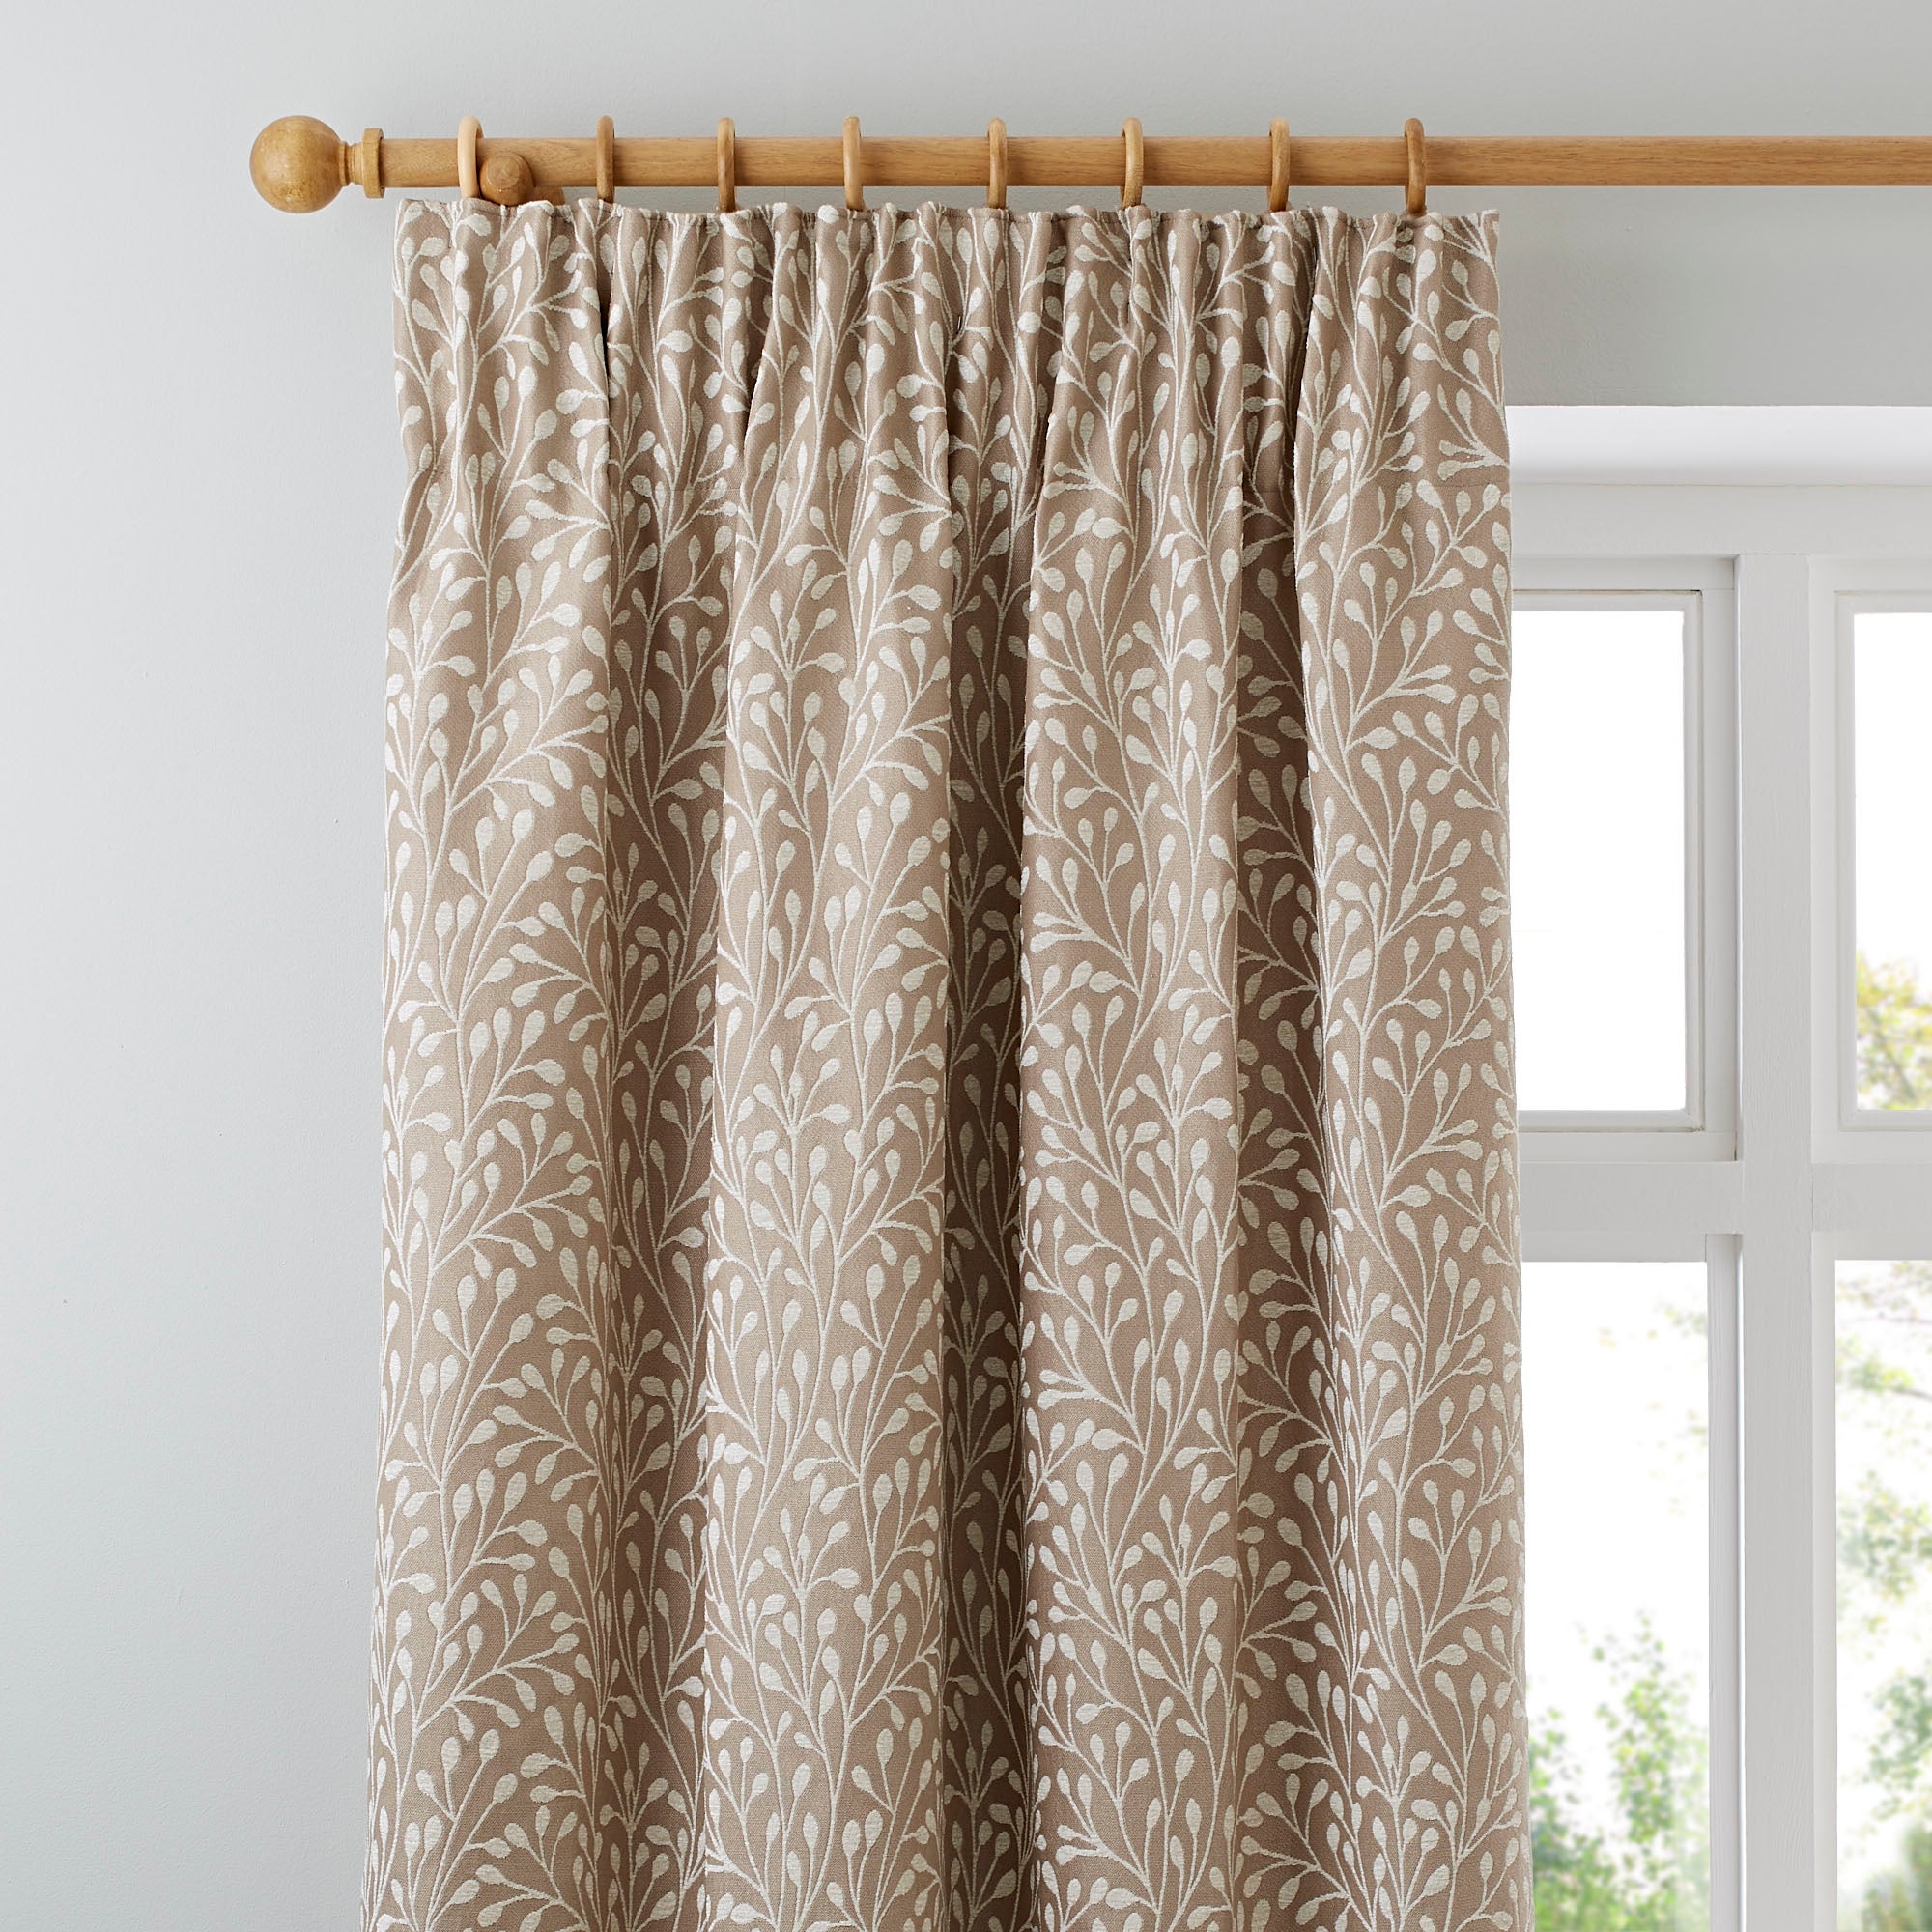 Pencil Pleat Curtains - Browse Our Full Range | Dunelm | Page 2